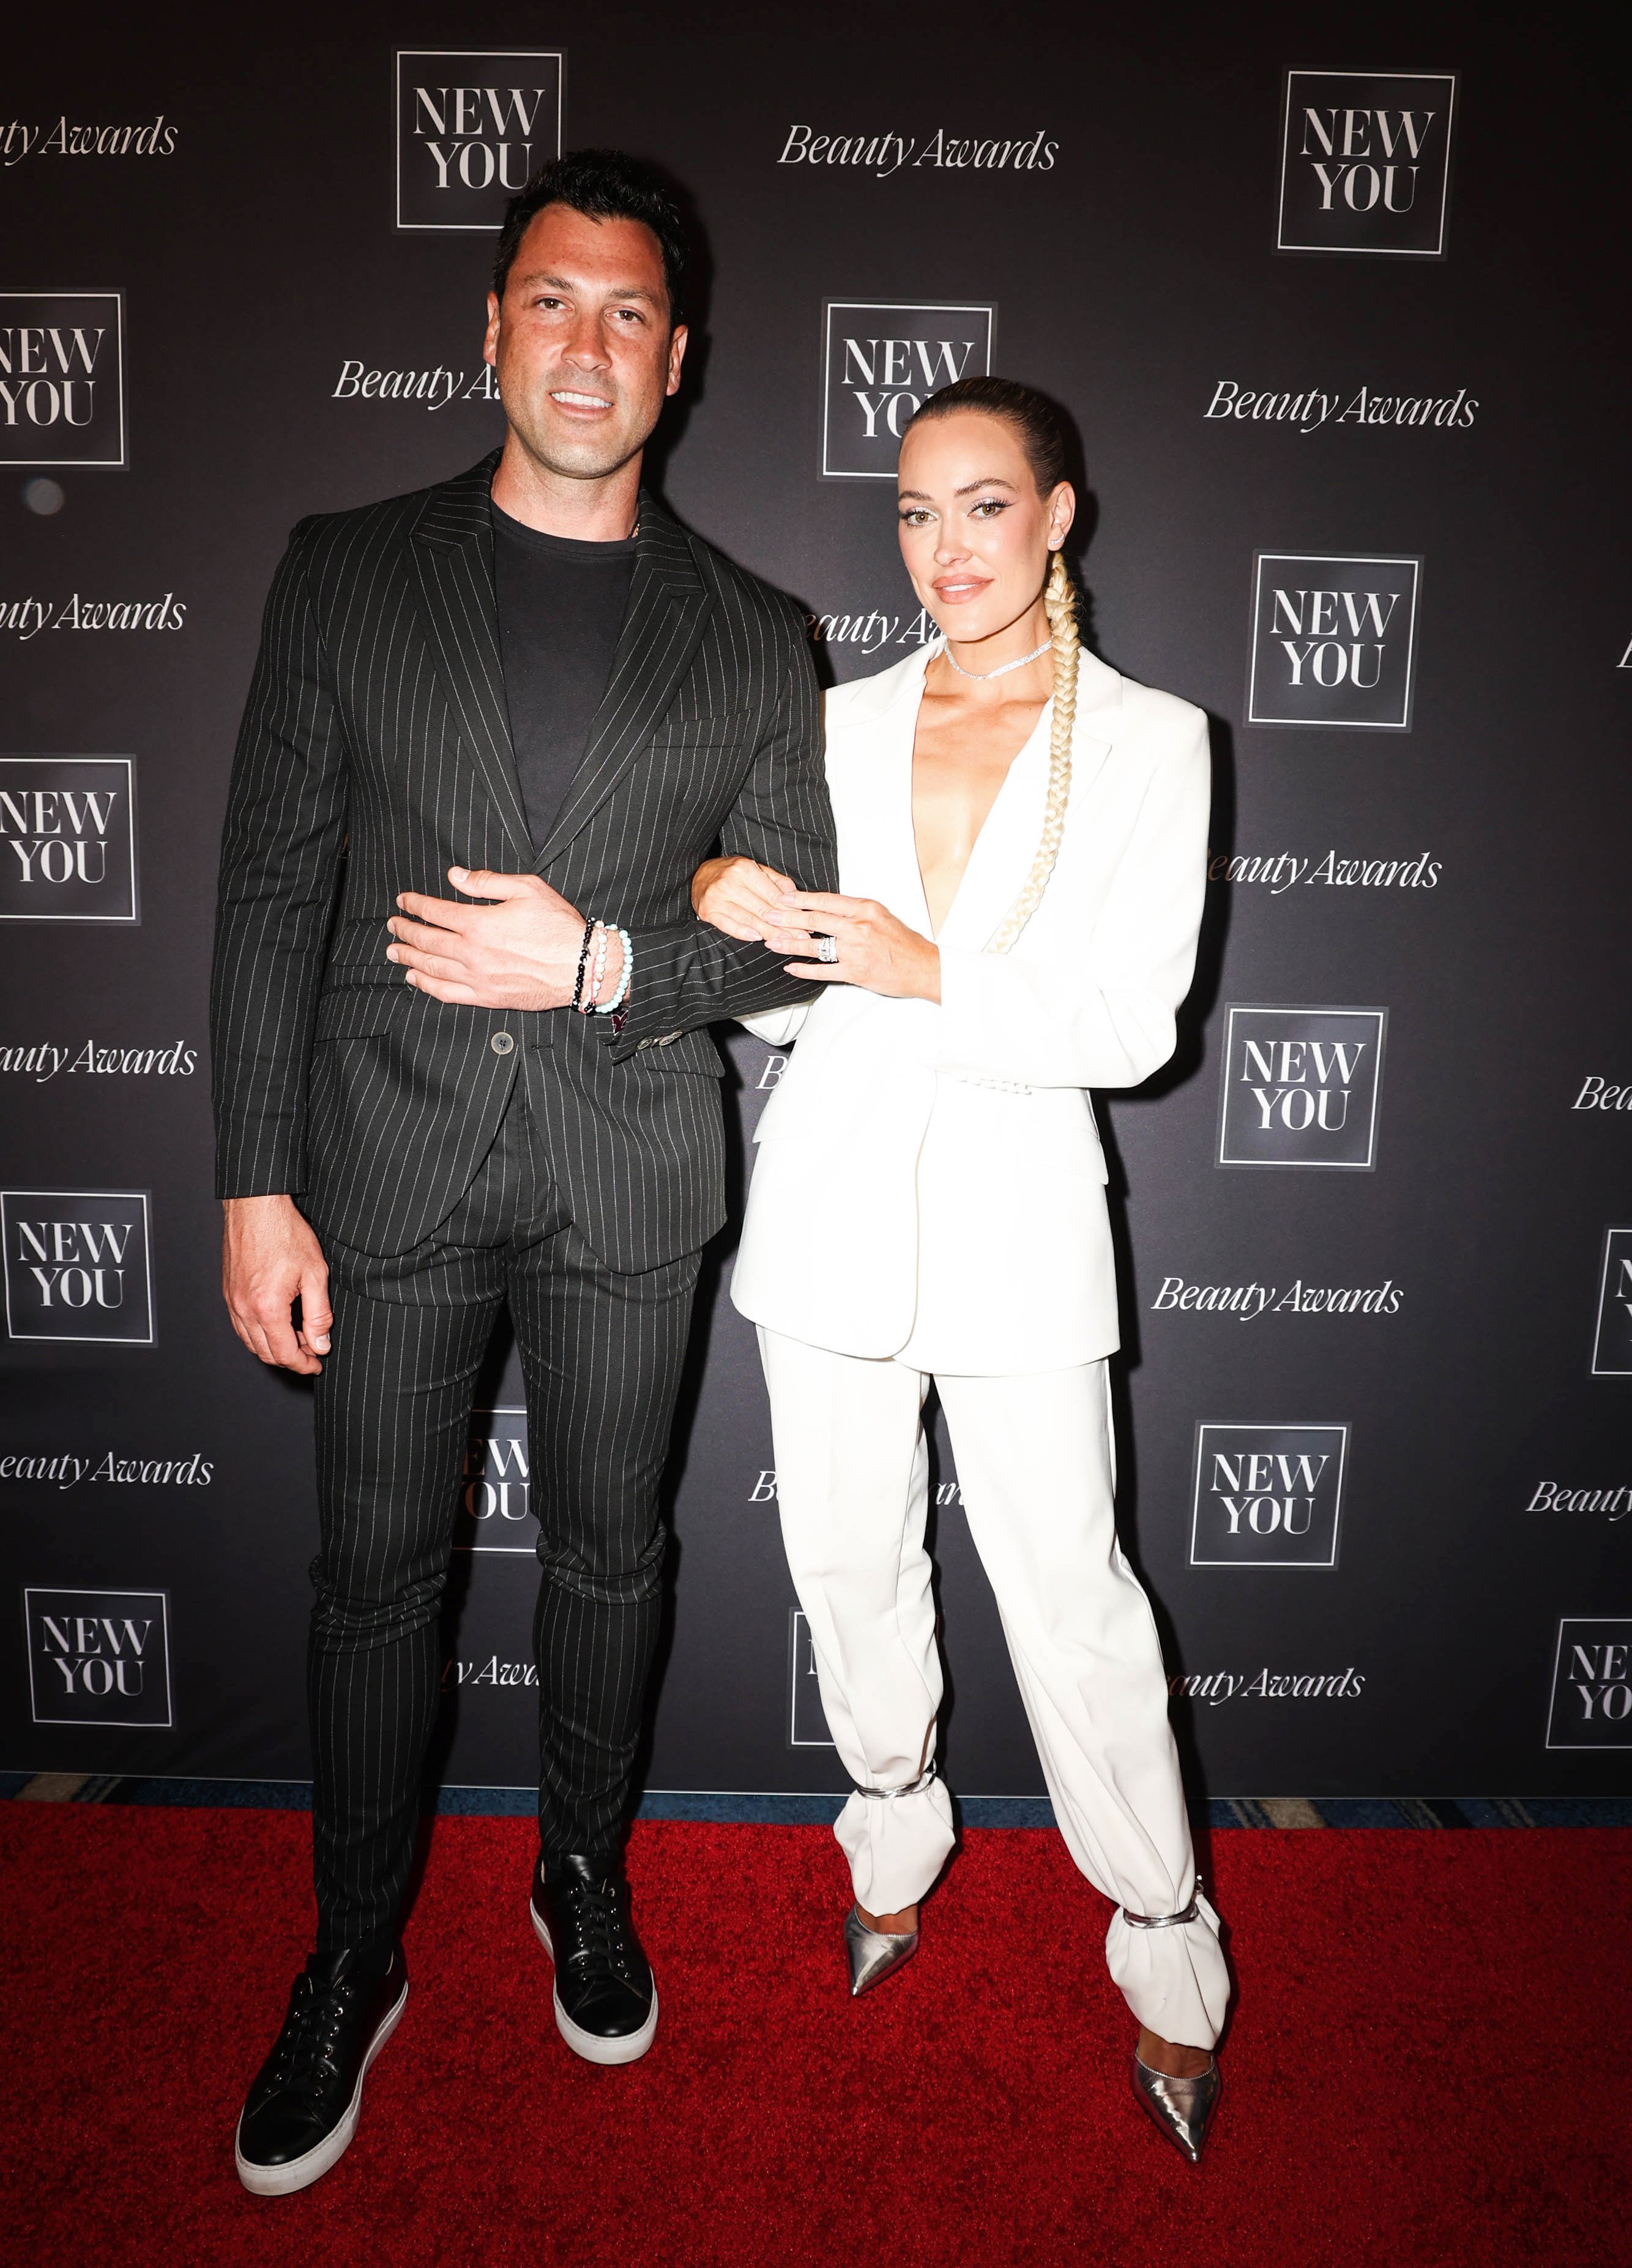 Maksim Chmerkovskiy and Peta Murgatroyd seen at 2022 New You Beauty Awards at Fontainebleau Miami Beach on April 07, 2022 in Miami Beach, Florida. | Source: Getty Images